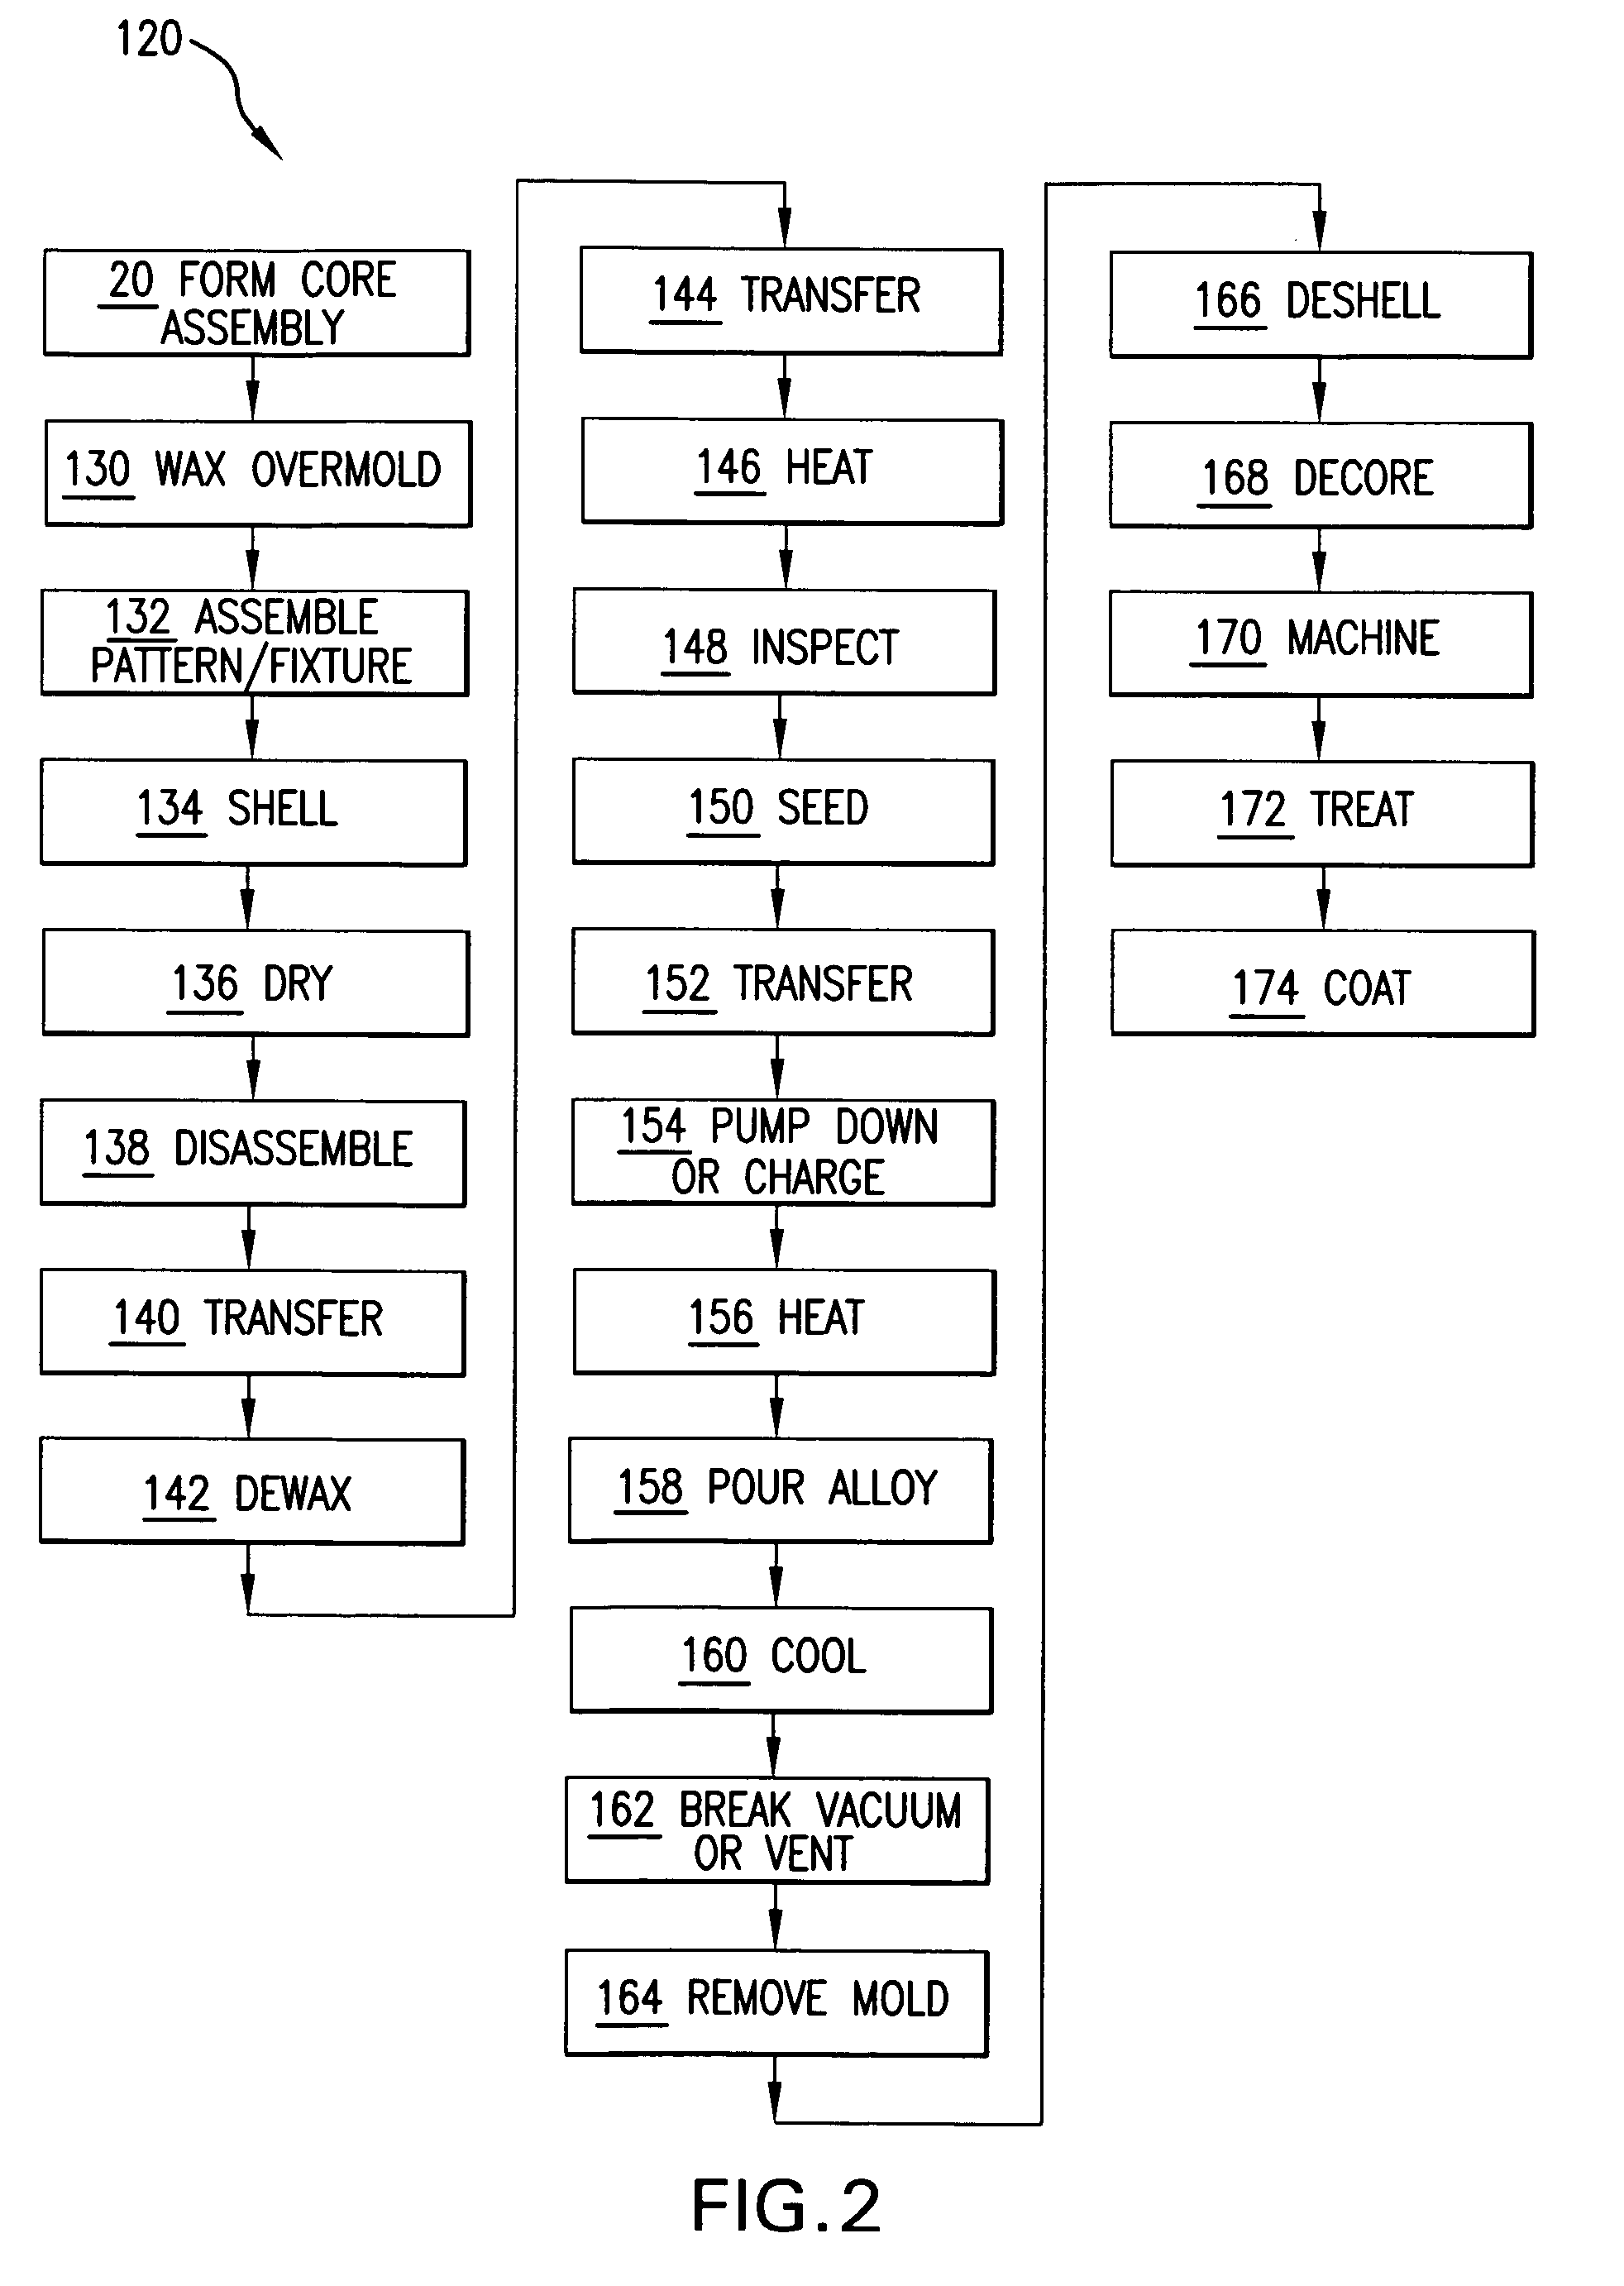 Method for firing a ceramic and refractory metal casting core